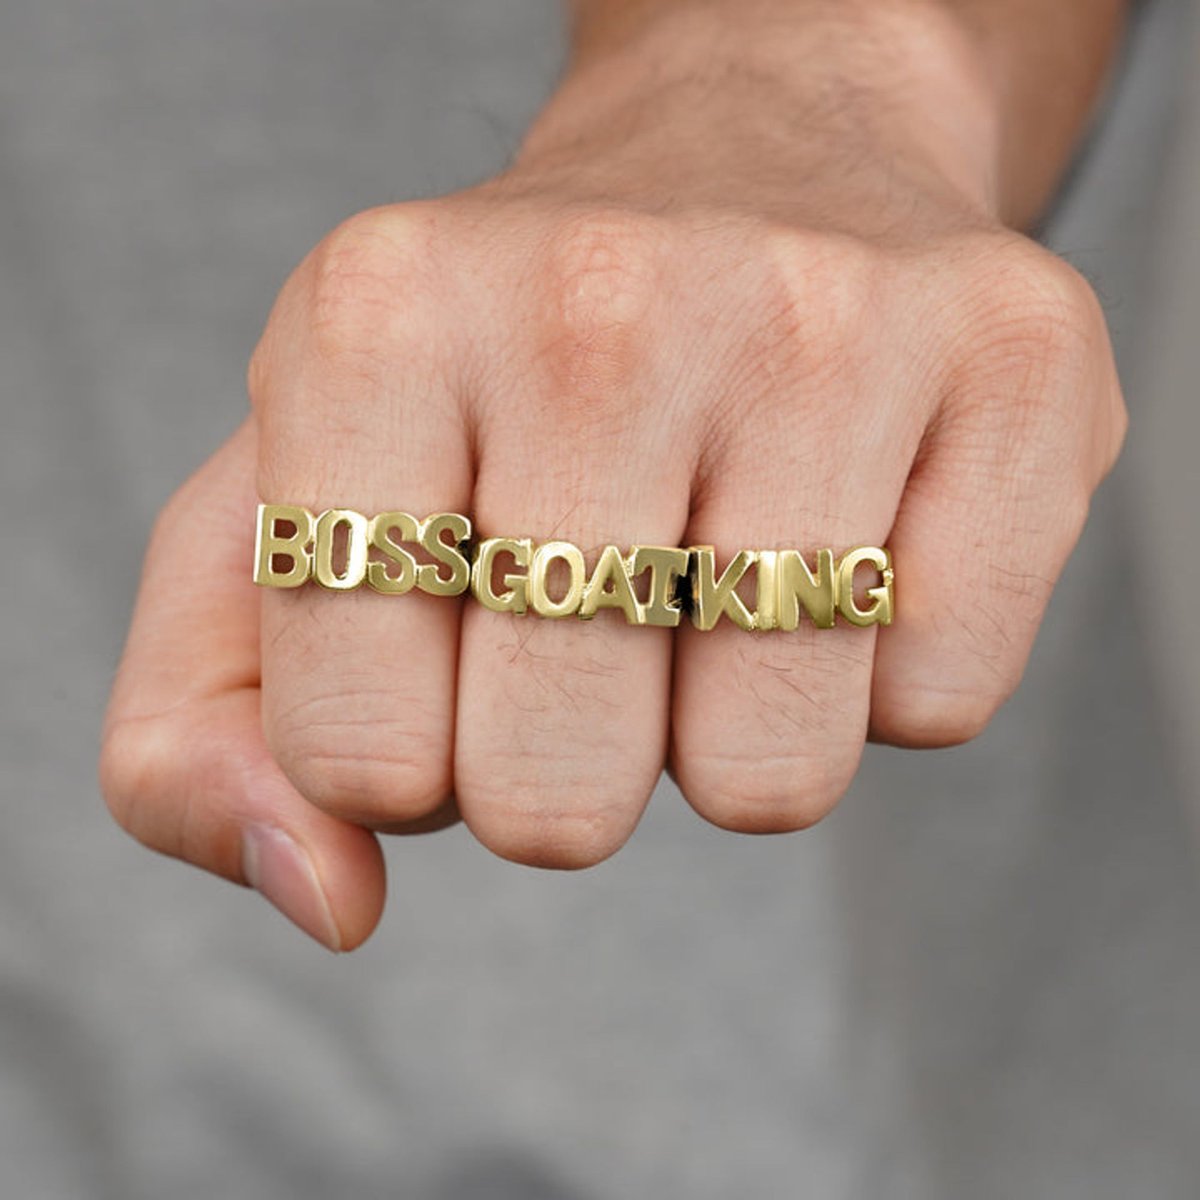 This 10k Gold Classic BOSS Ring exudes confidence and style, making a bold statement wherever you go ✨

#nolters #noltersgold #realgoldring #goldring #10kgoldring #losangeles #losangelescalifornia